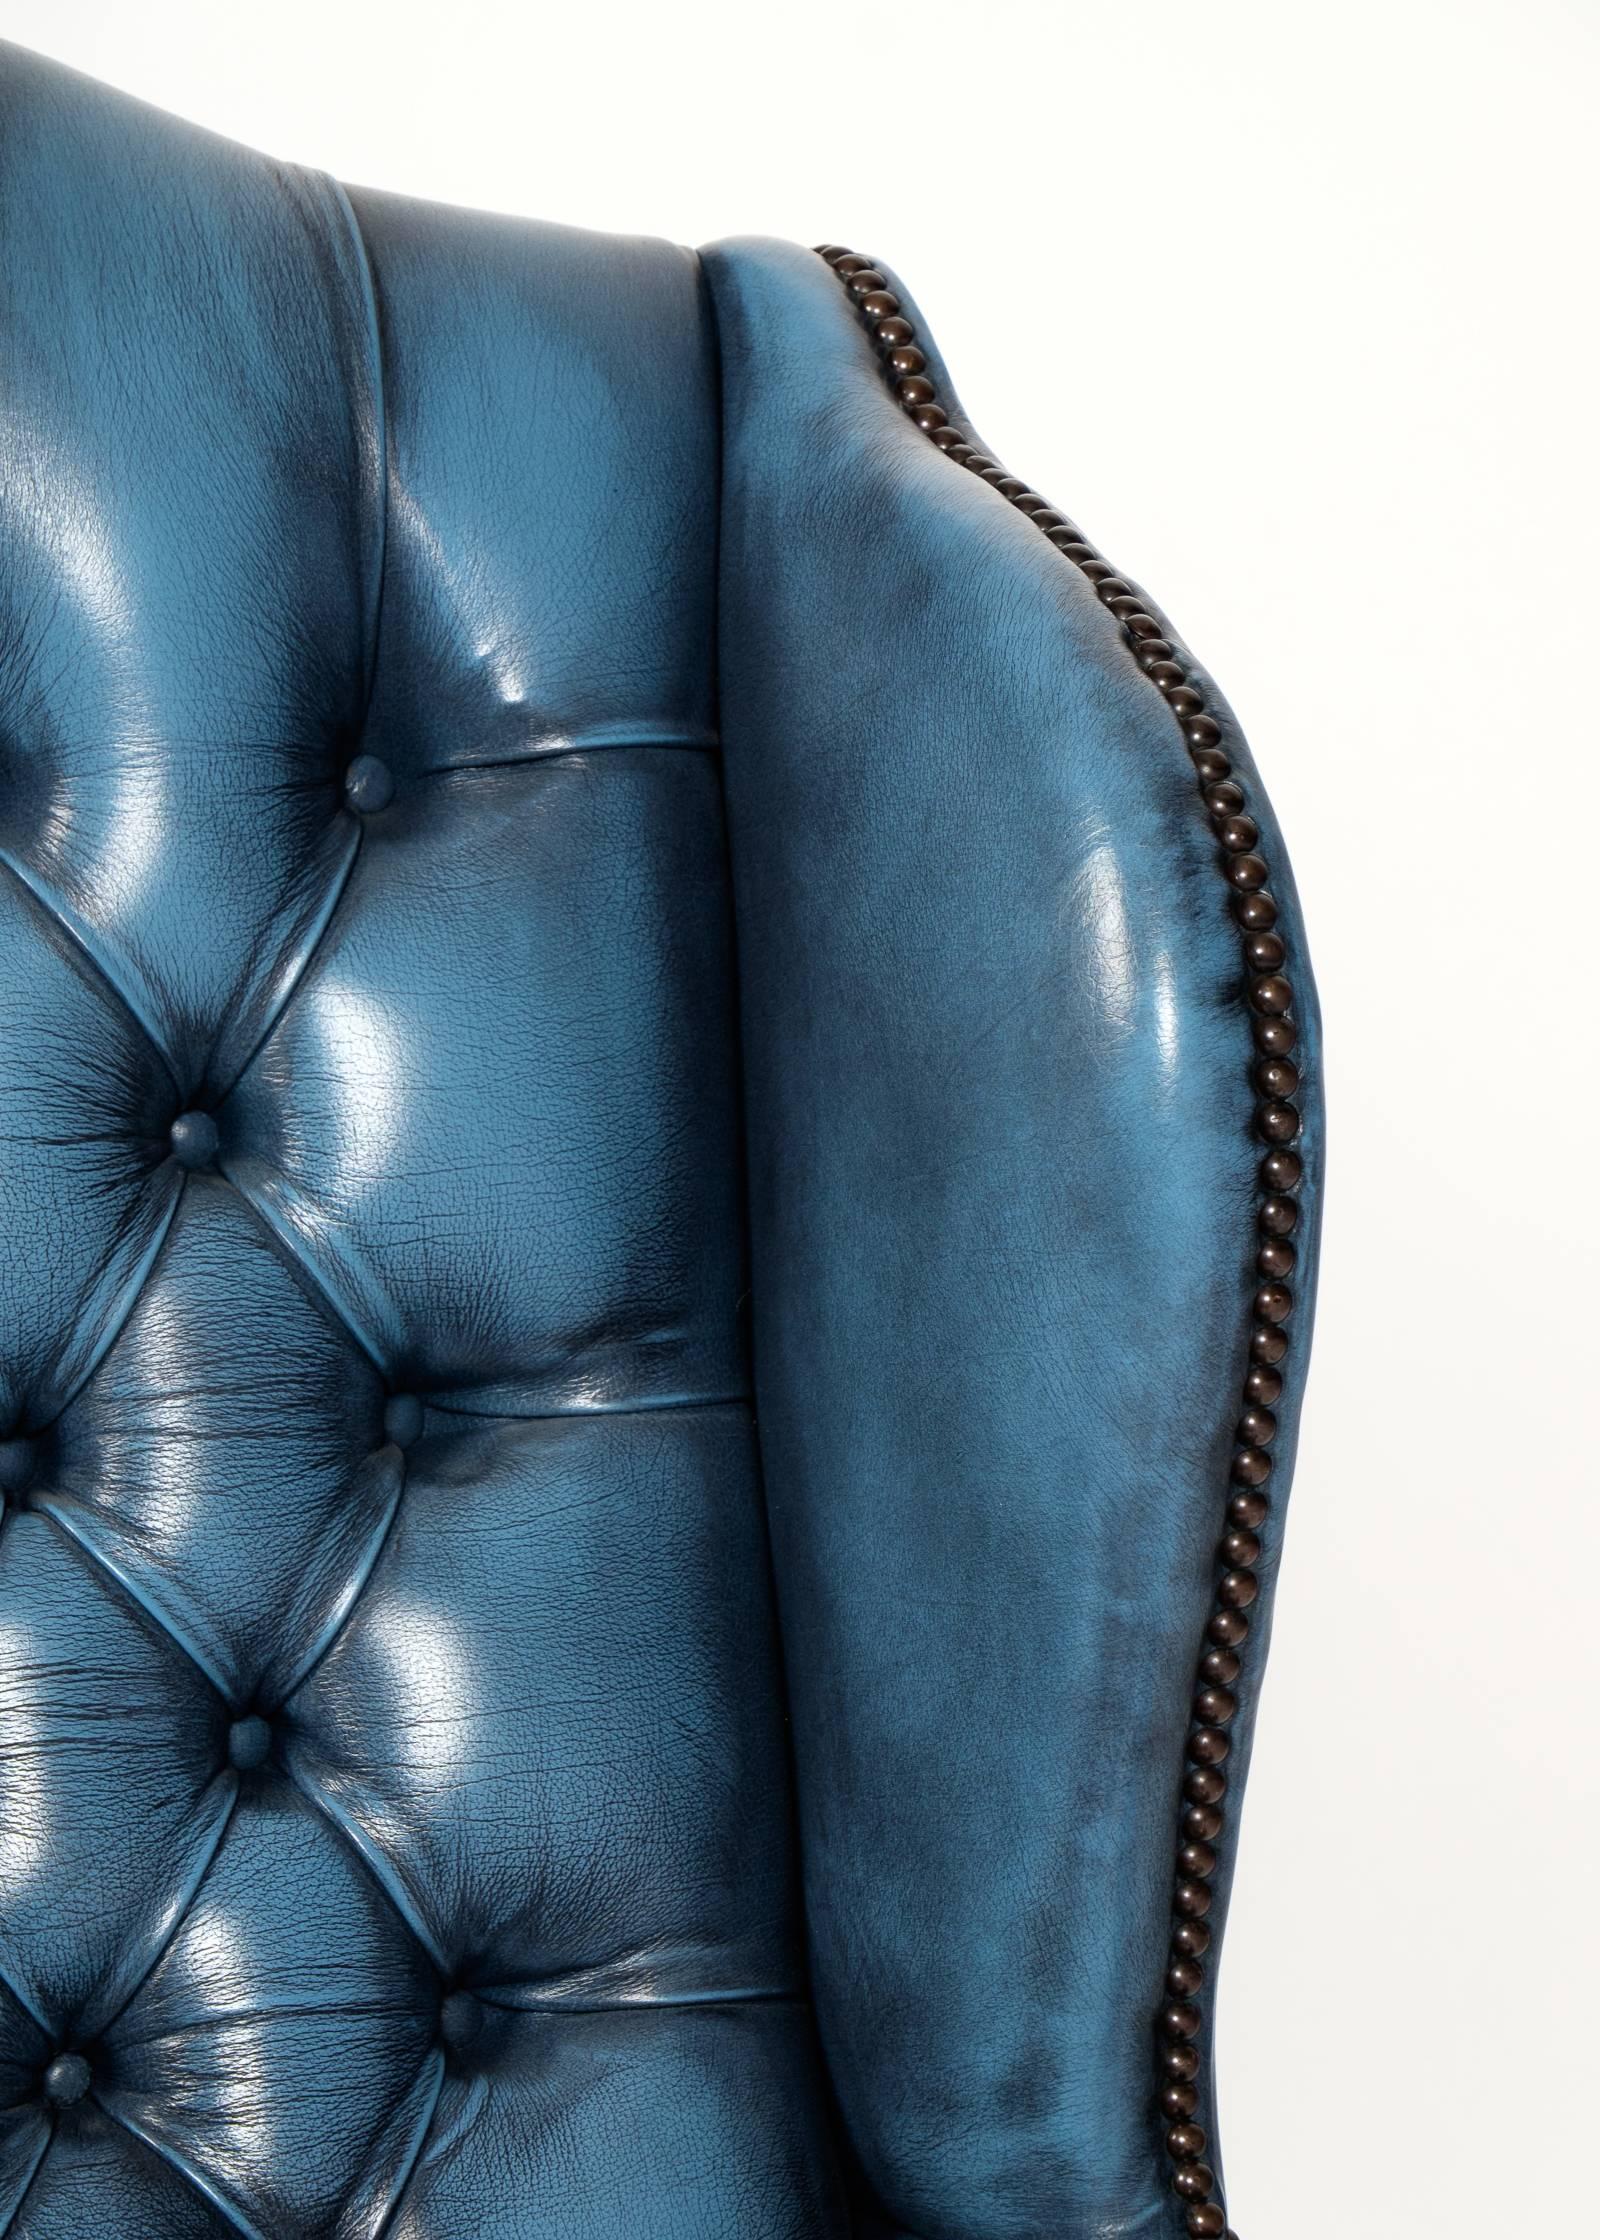 Mid-Century Modern Vintage Steel Blue Leather Chesterfield Wingback Armchair